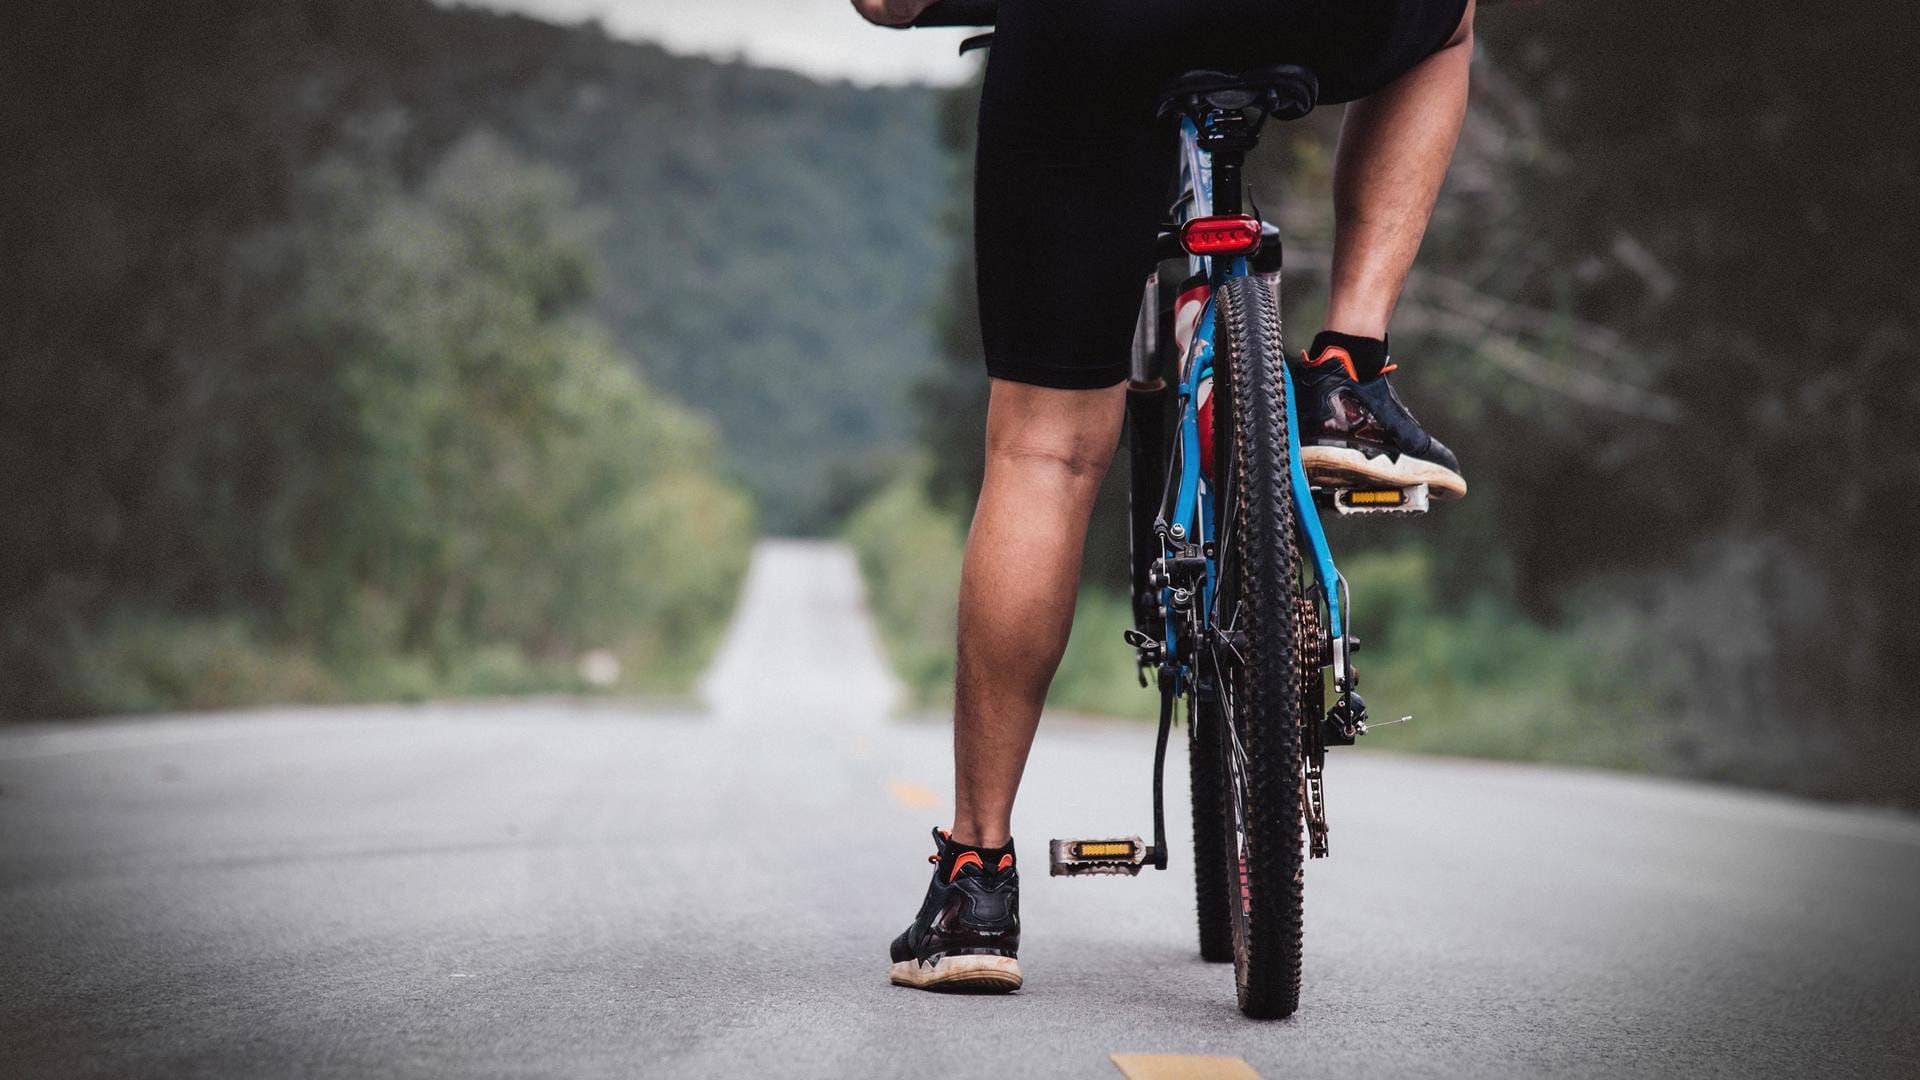 Watch out for downsides of excessive cycling on your body